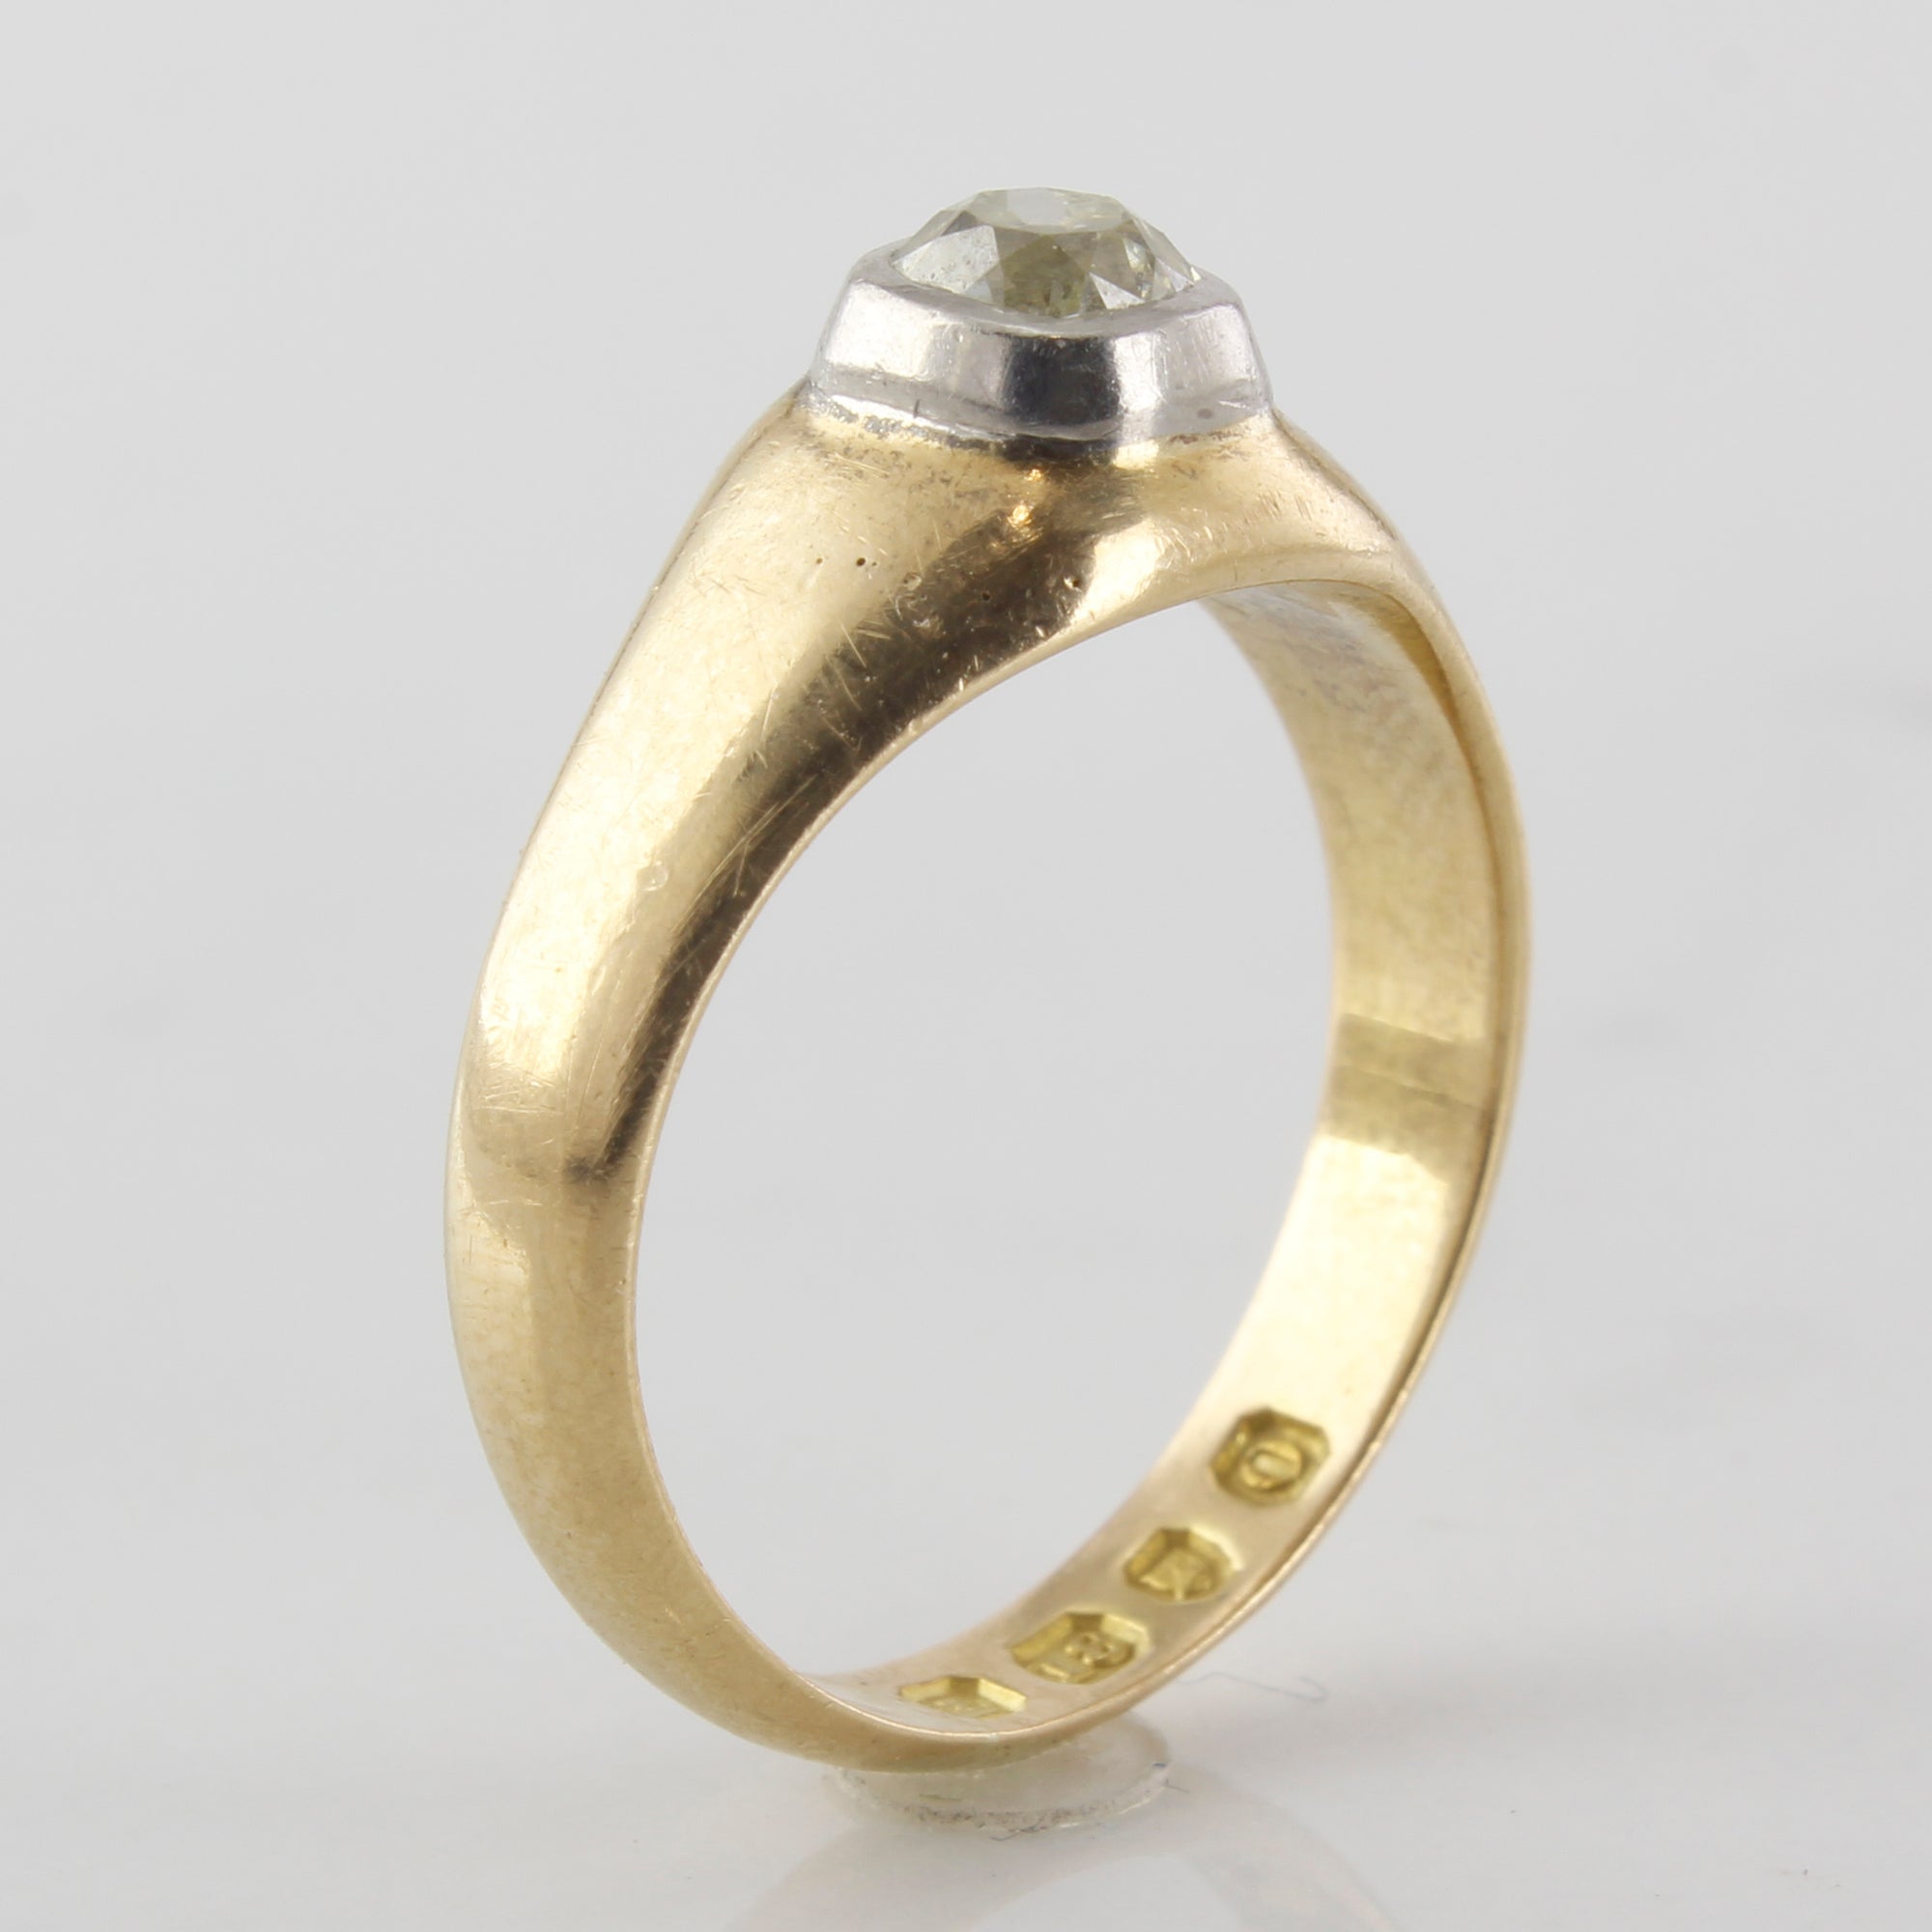 Vintage diamond ring with gold band, 1909 antique ring for sale in USA